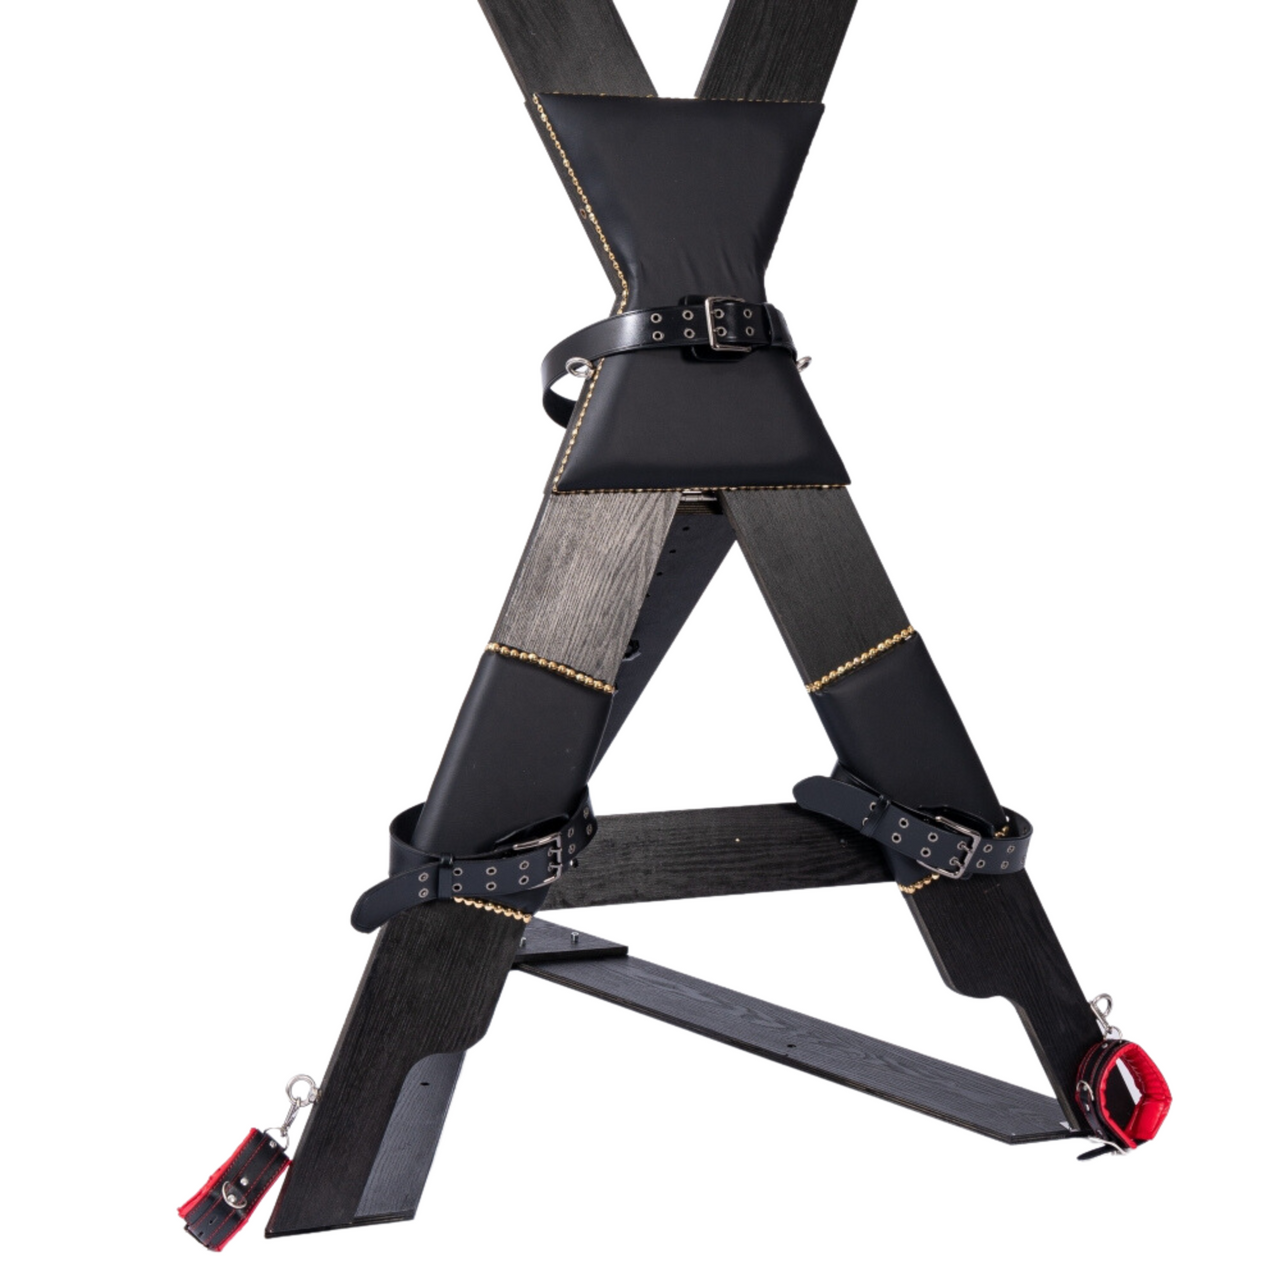 Roomsacred Black Series Luxury St. Andrew's Cross with Wrist and Ankle Cuffs Free Standing or Wall Mount